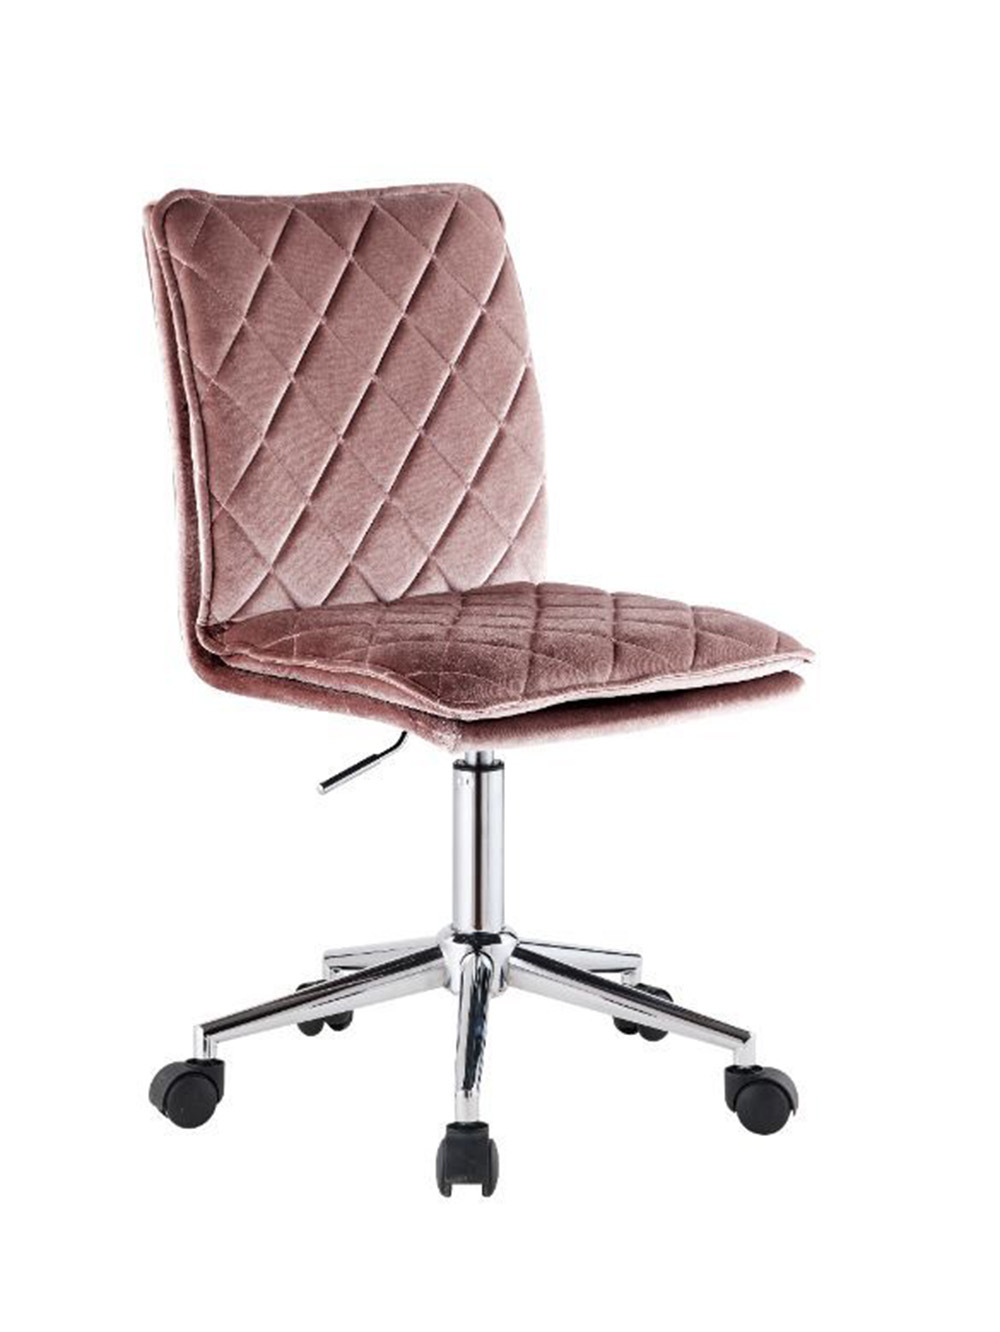 ACME Aestris Modern Leisure Velvet Swivel Chair Height Adjustable with Backrest and Casters for Living Room, Bedroom, Dining Room, Office - Pink